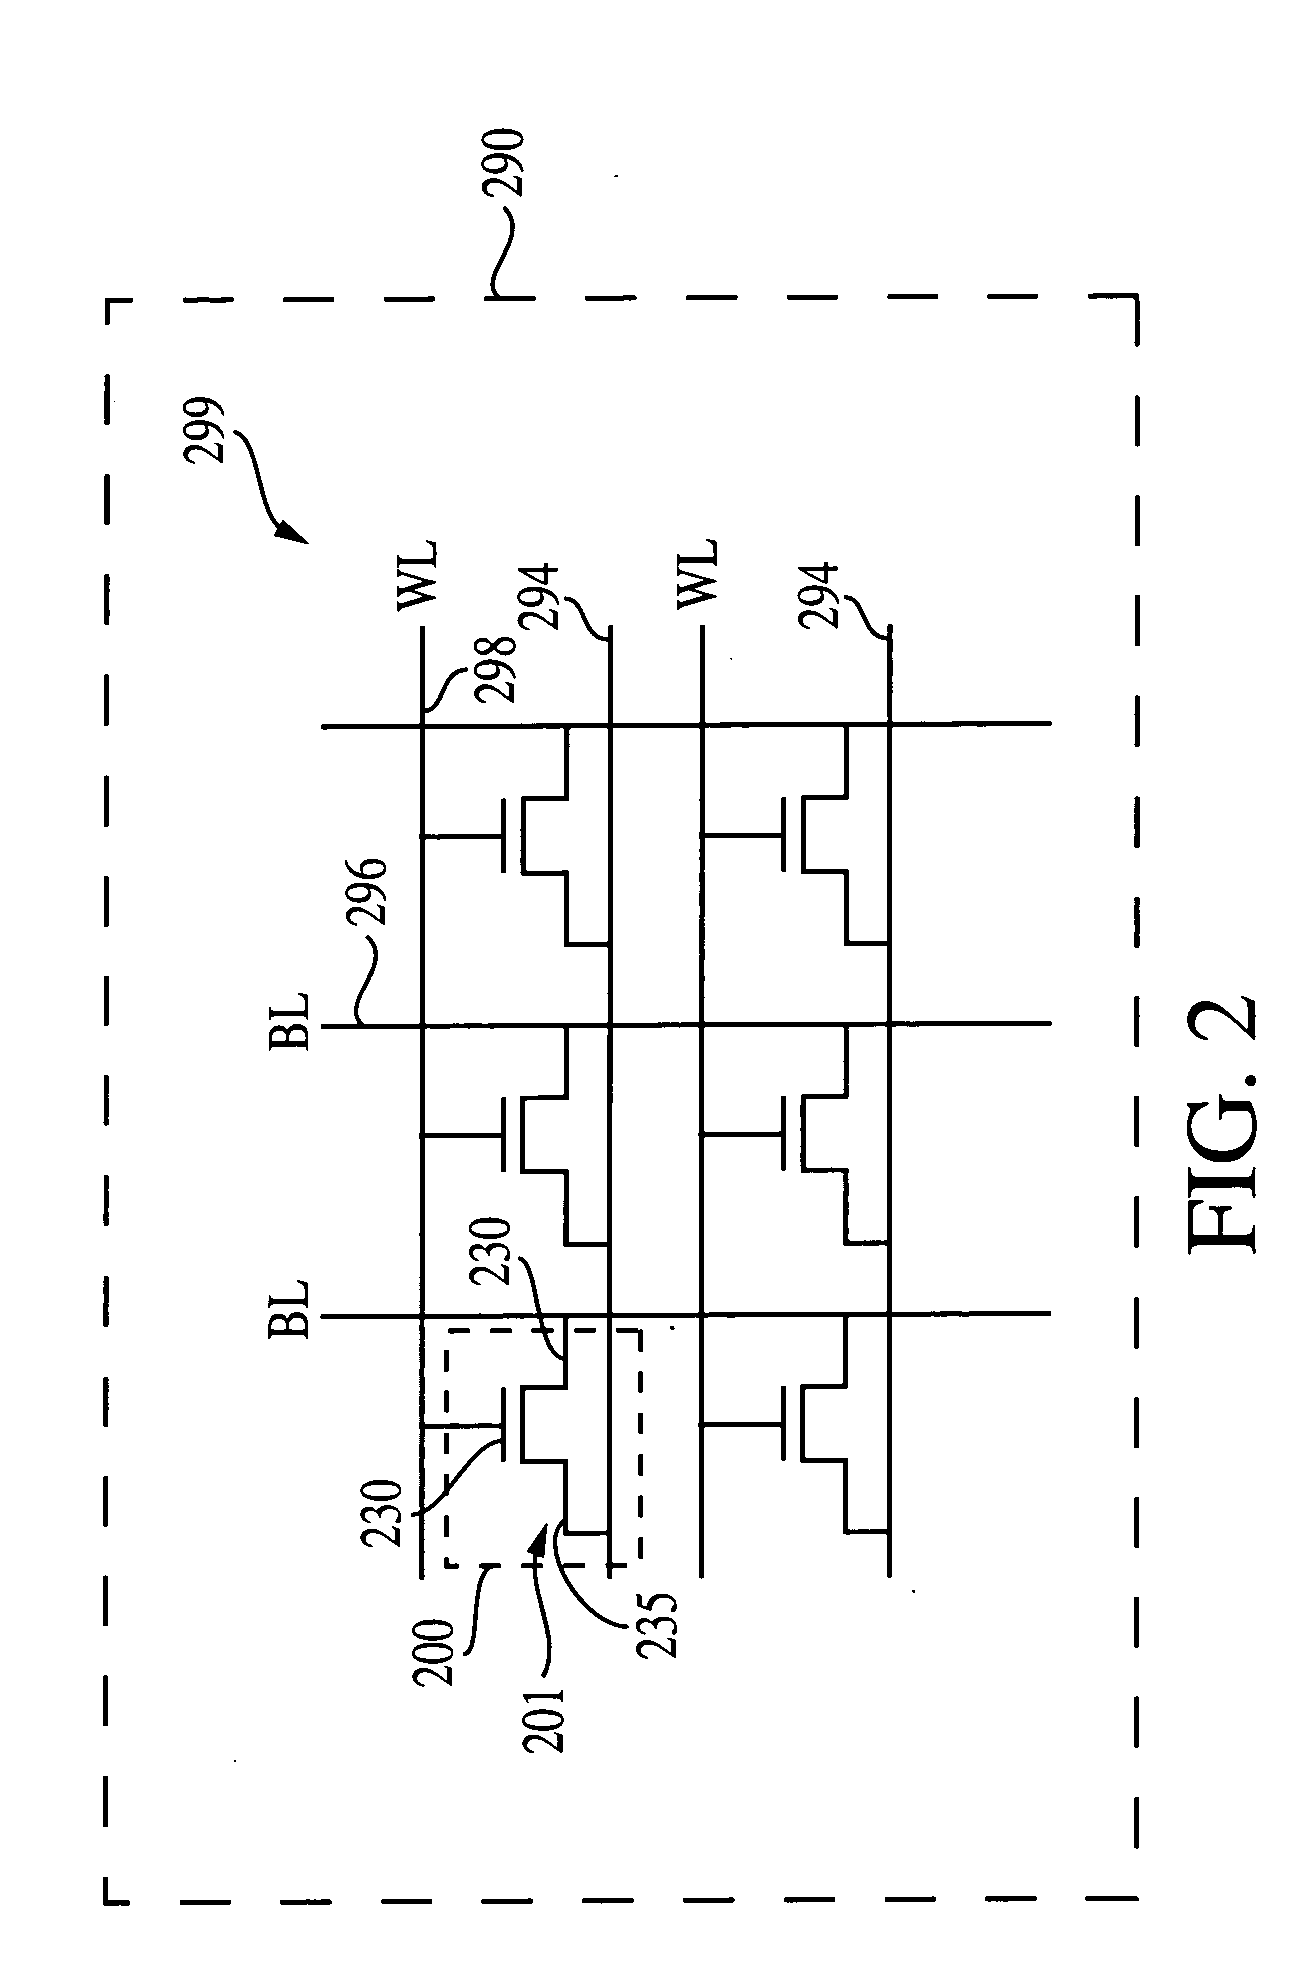 Method of forming a memory device having a storage transistor